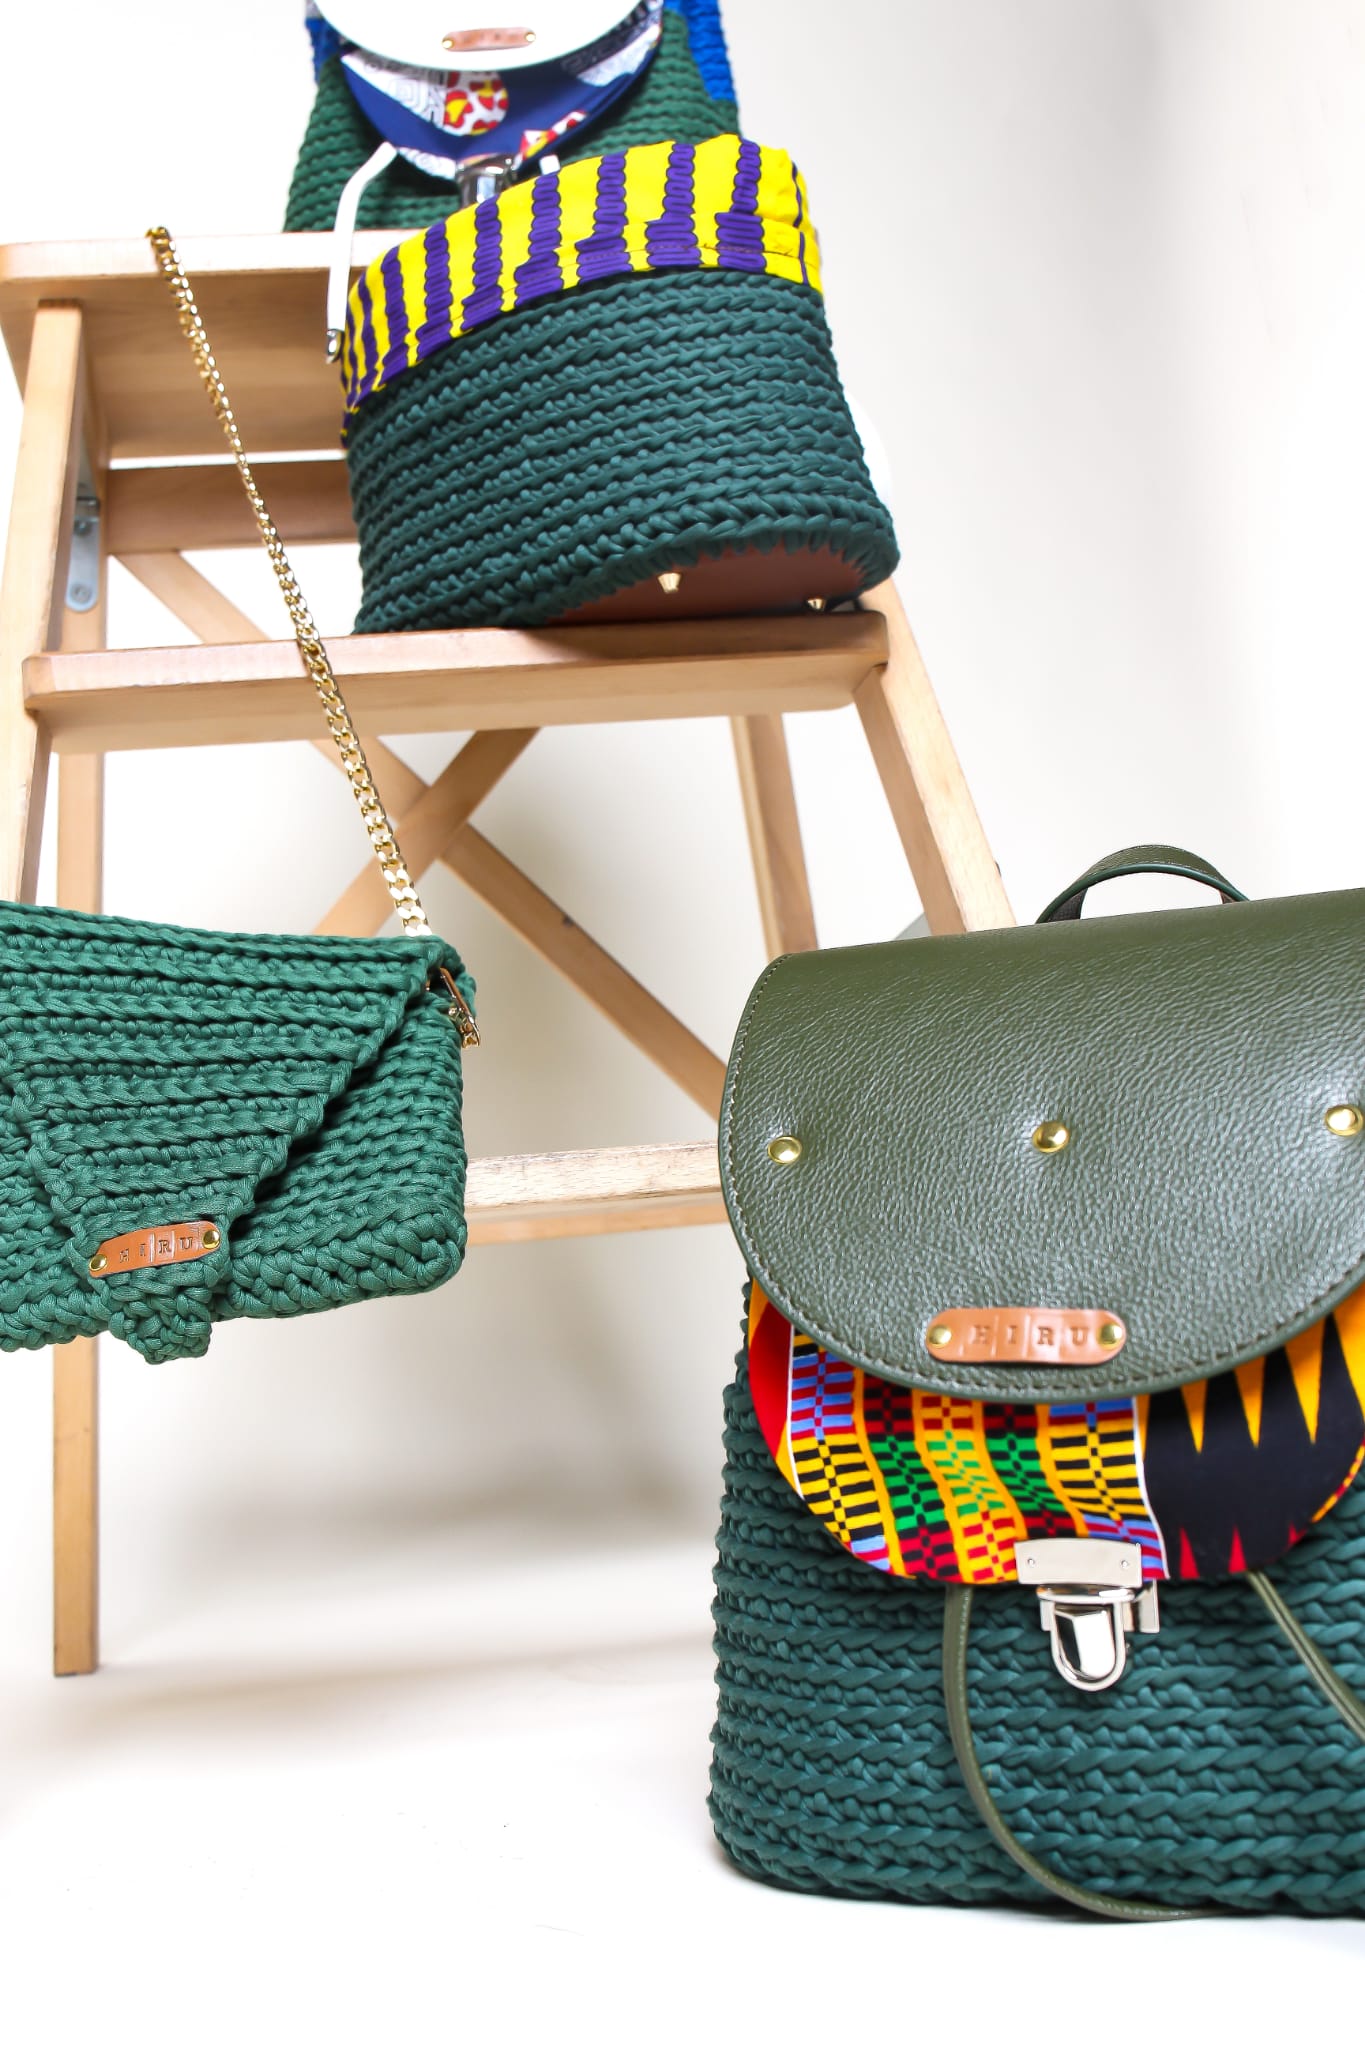 crocheted, forest/ oak green bag, with an African style print. Shown with matching, crocheted, green clutch bag.